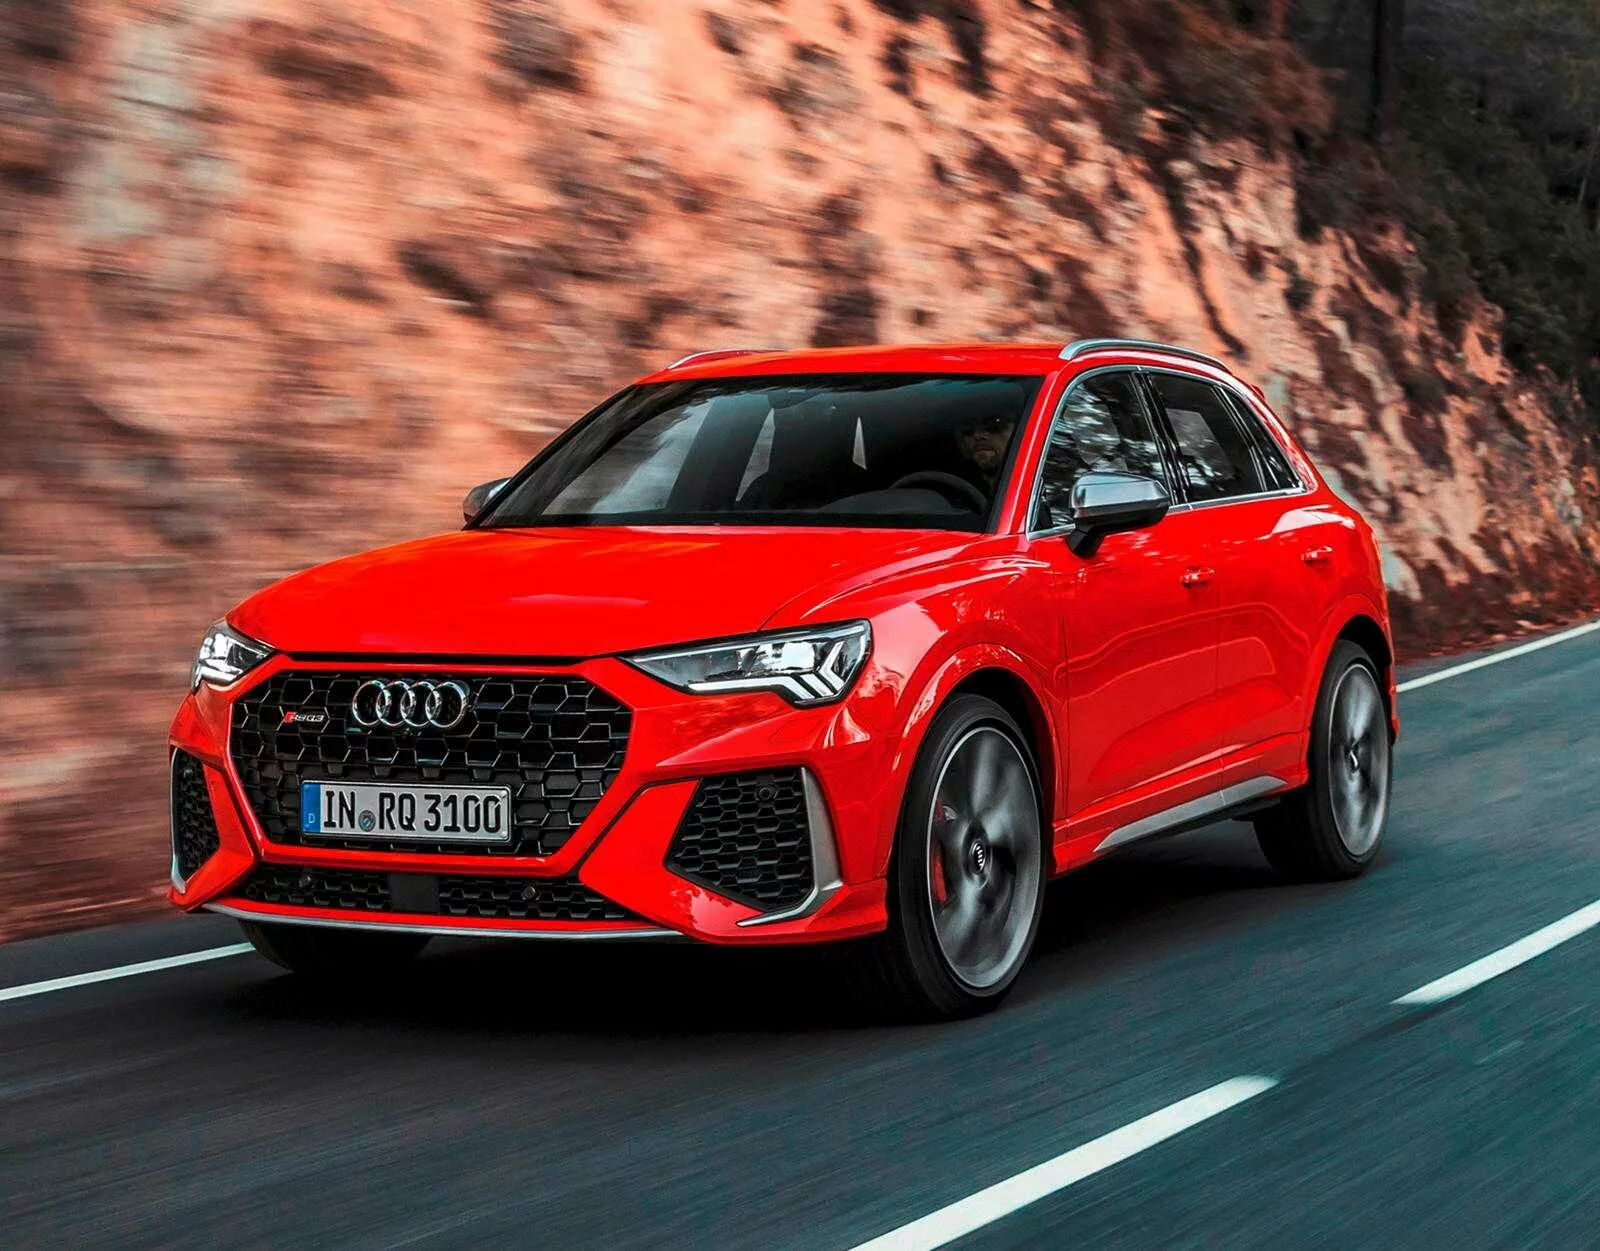 Audi Explains Why The RS Q3 Isn't Right For The US